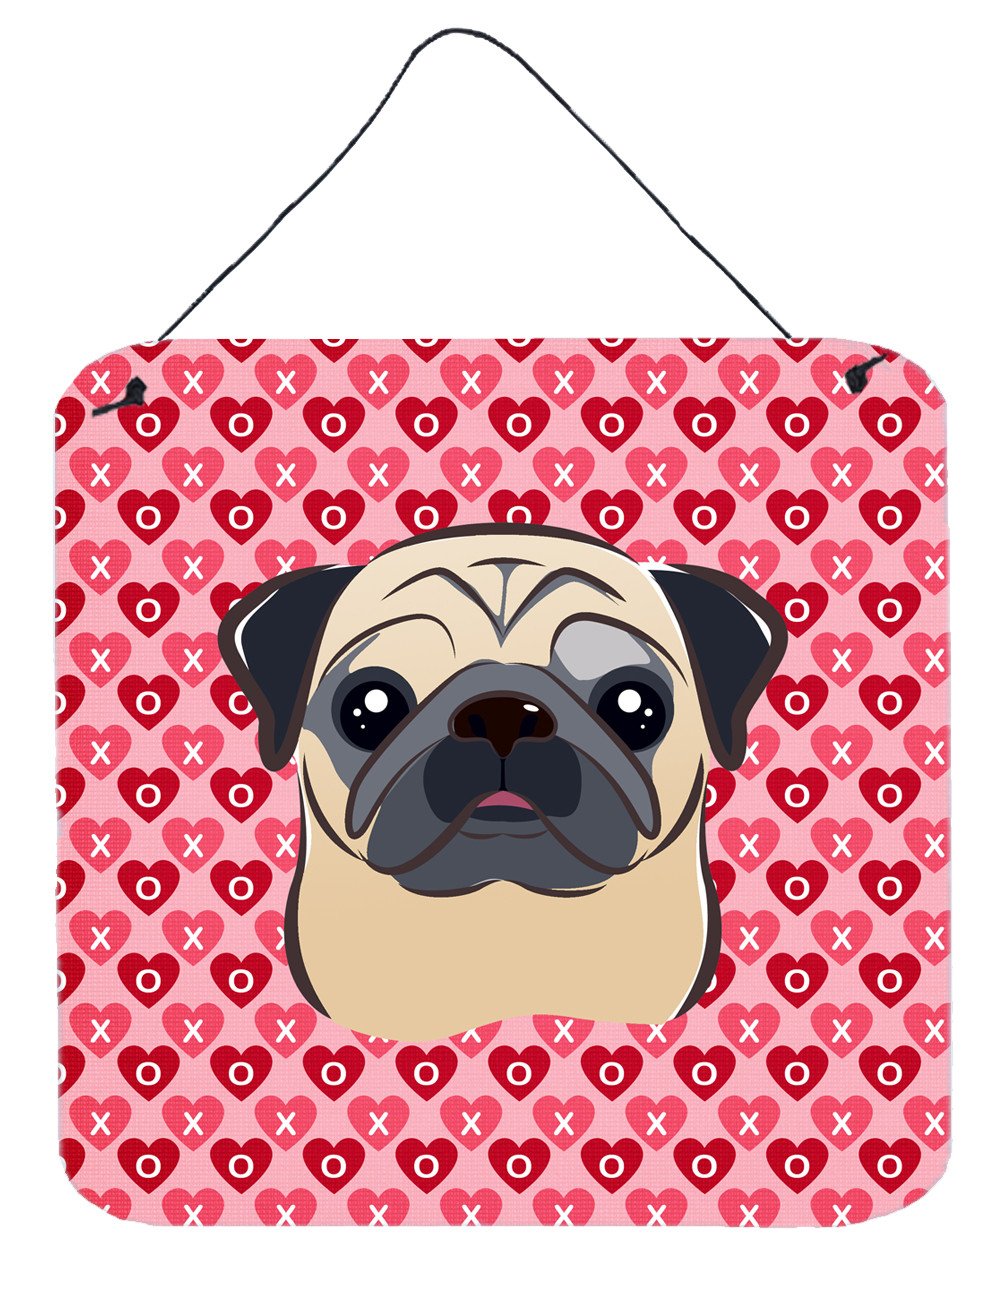 Fawn Pug Hearts Wall or Door Hanging Prints BB5332DS66 by Caroline's Treasures